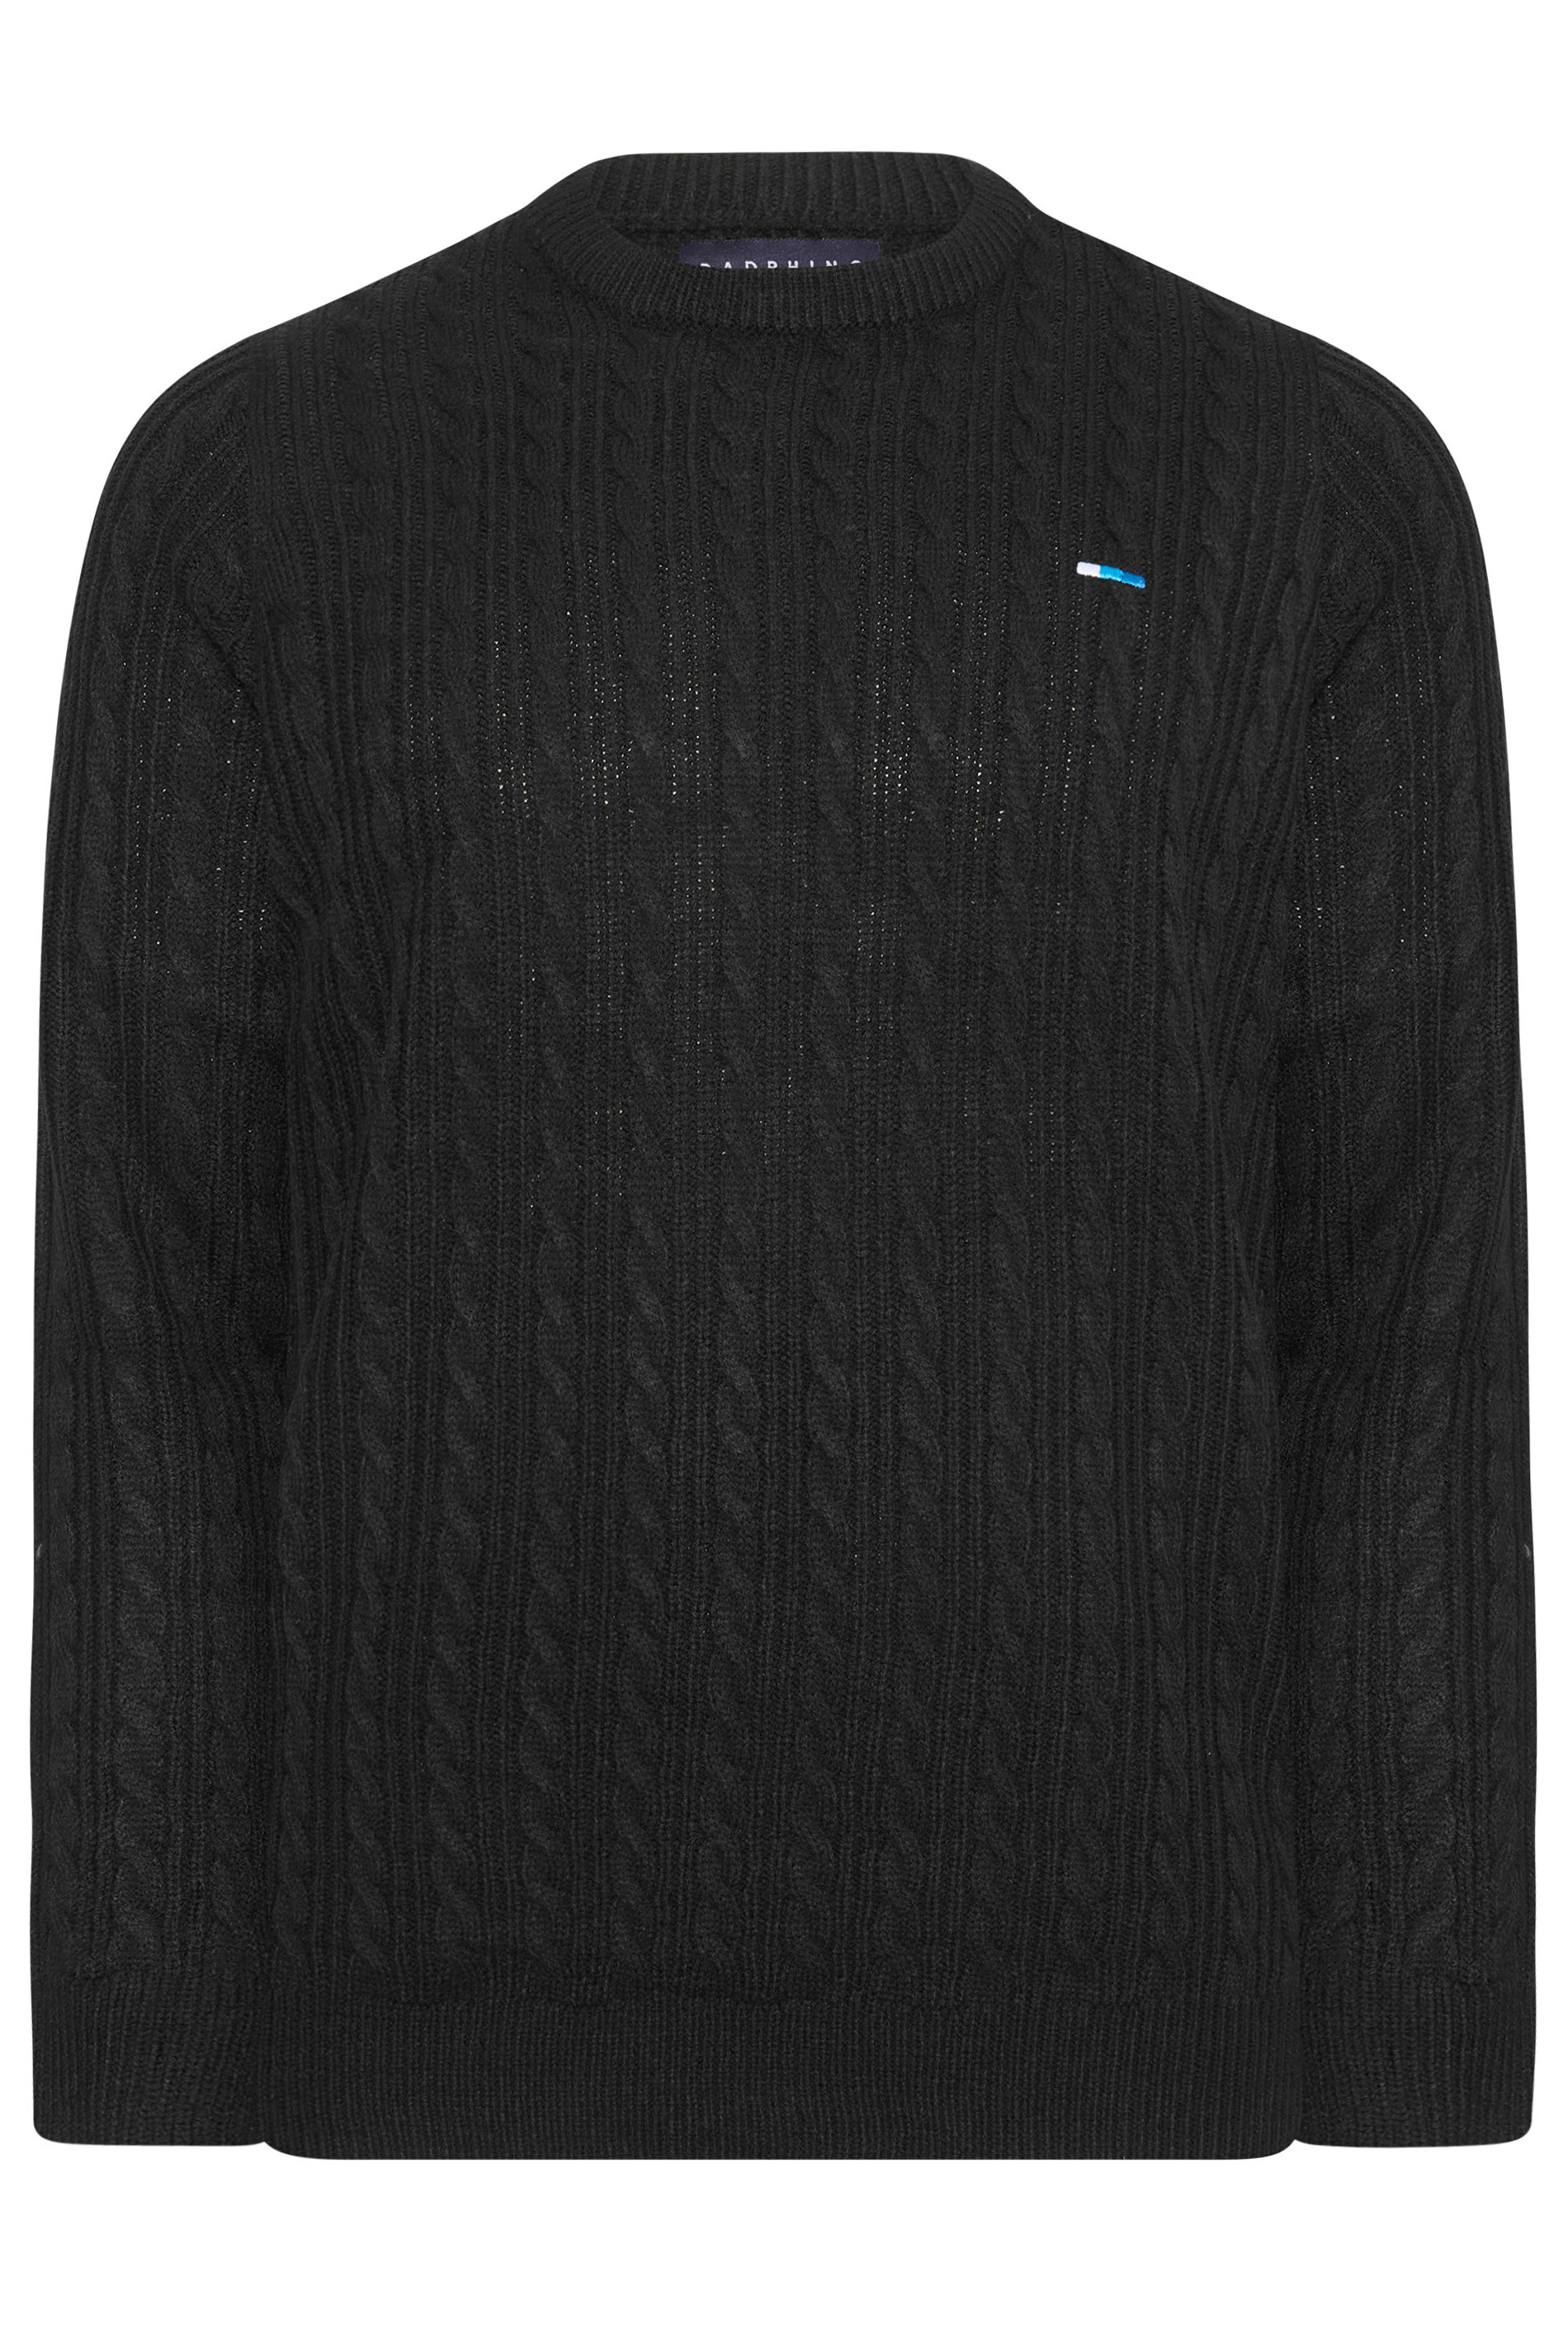 BadRhino Black Essential Cable Knitted Jumper | BadRhino 3